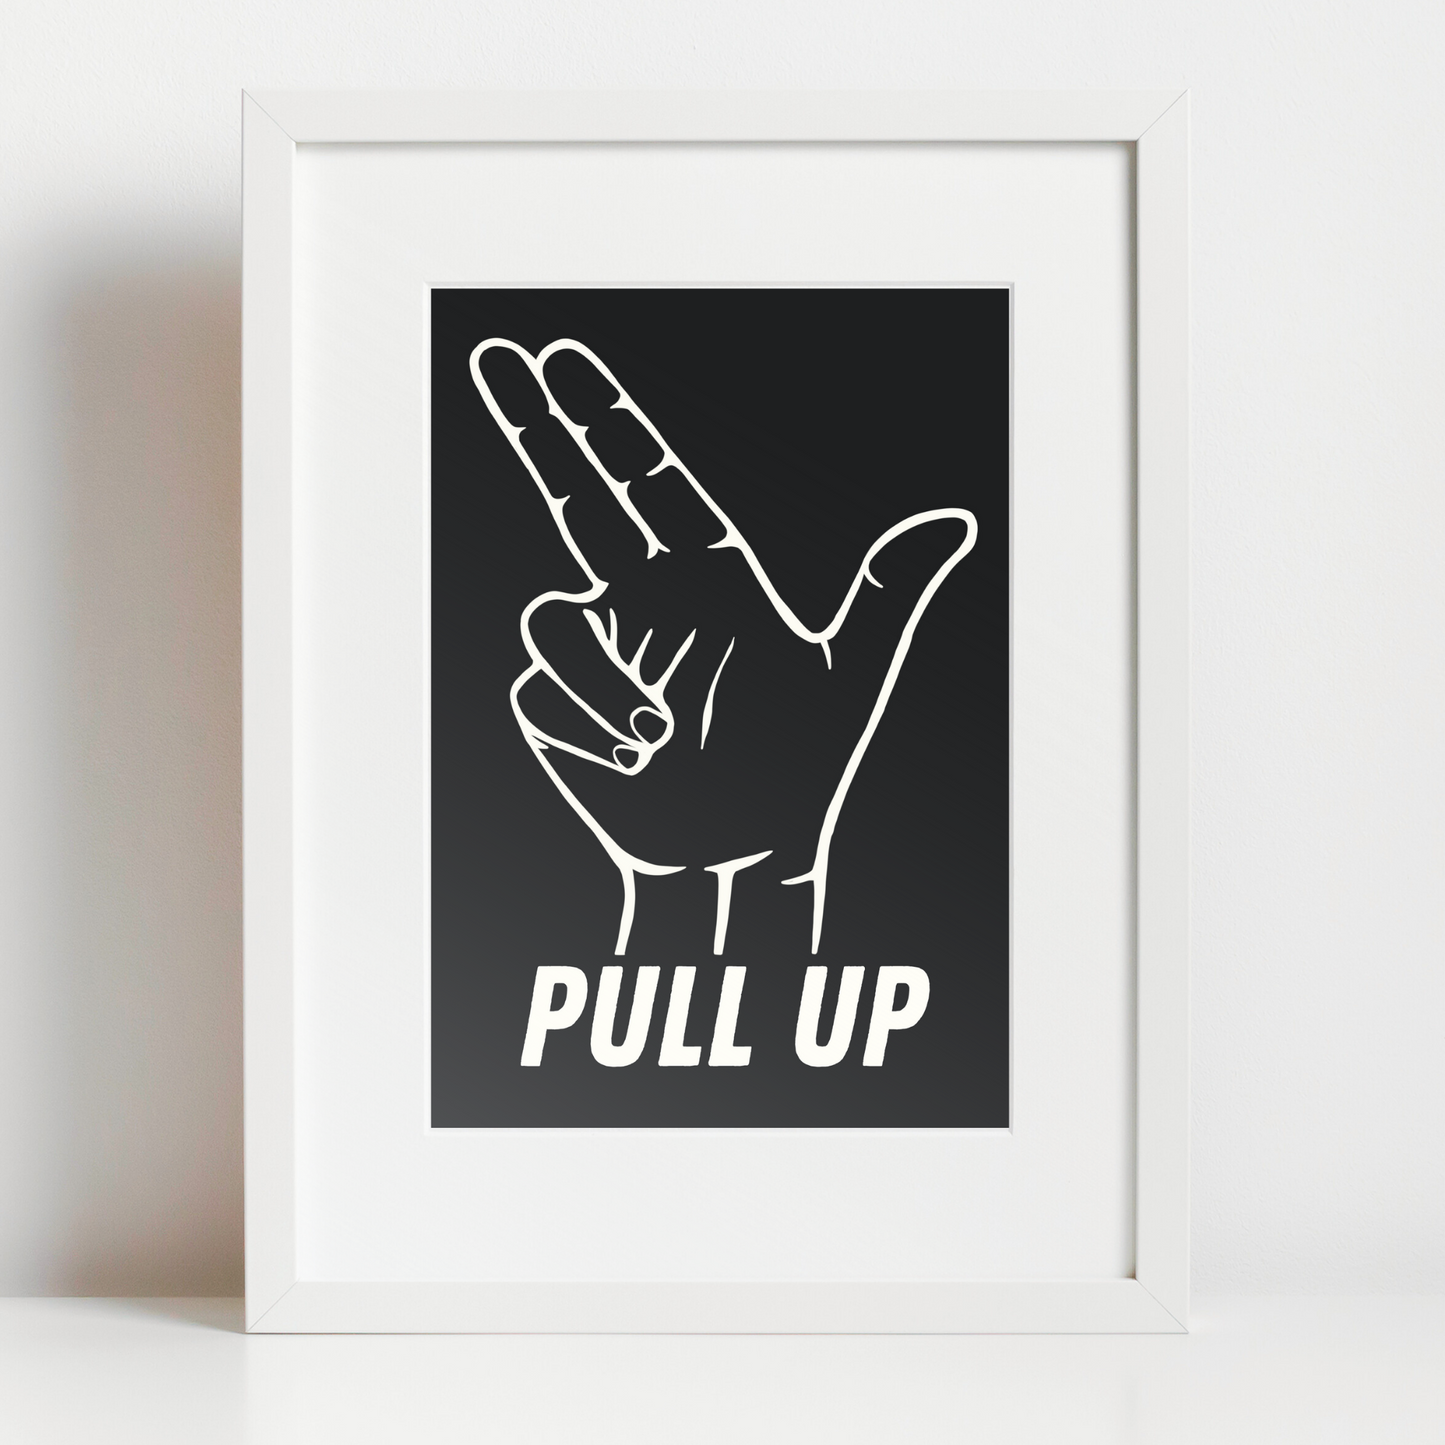 Pull Up A5 Print